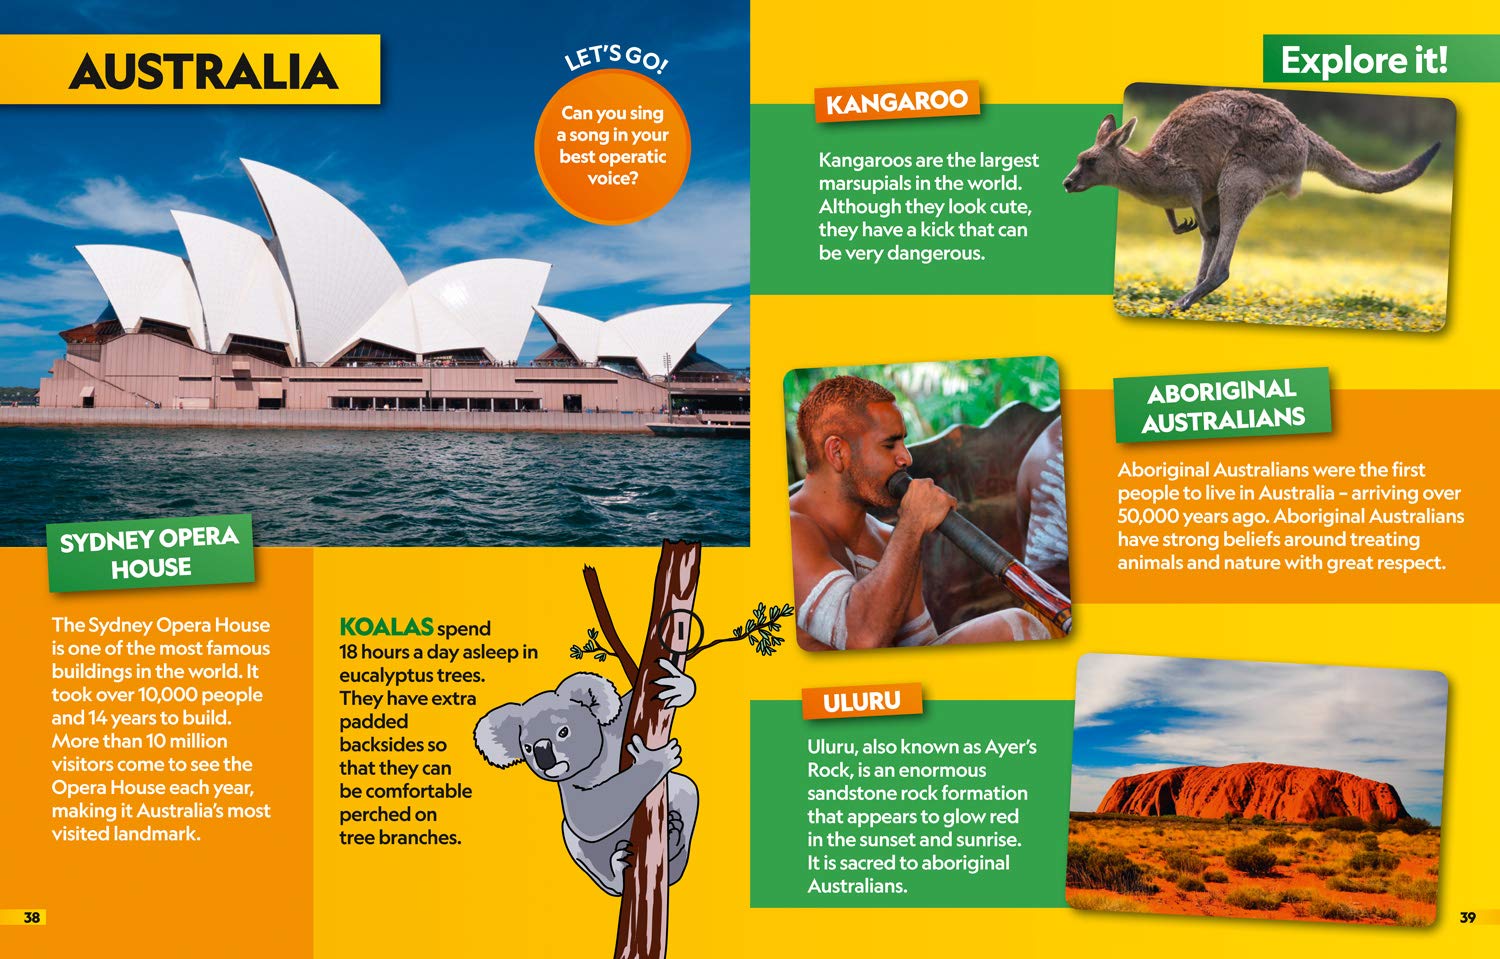 Around the World Find it! Explore it!: More than 250 things to find, facts and photos! (National Geographic Kids) - The English Bookshop Kuwait